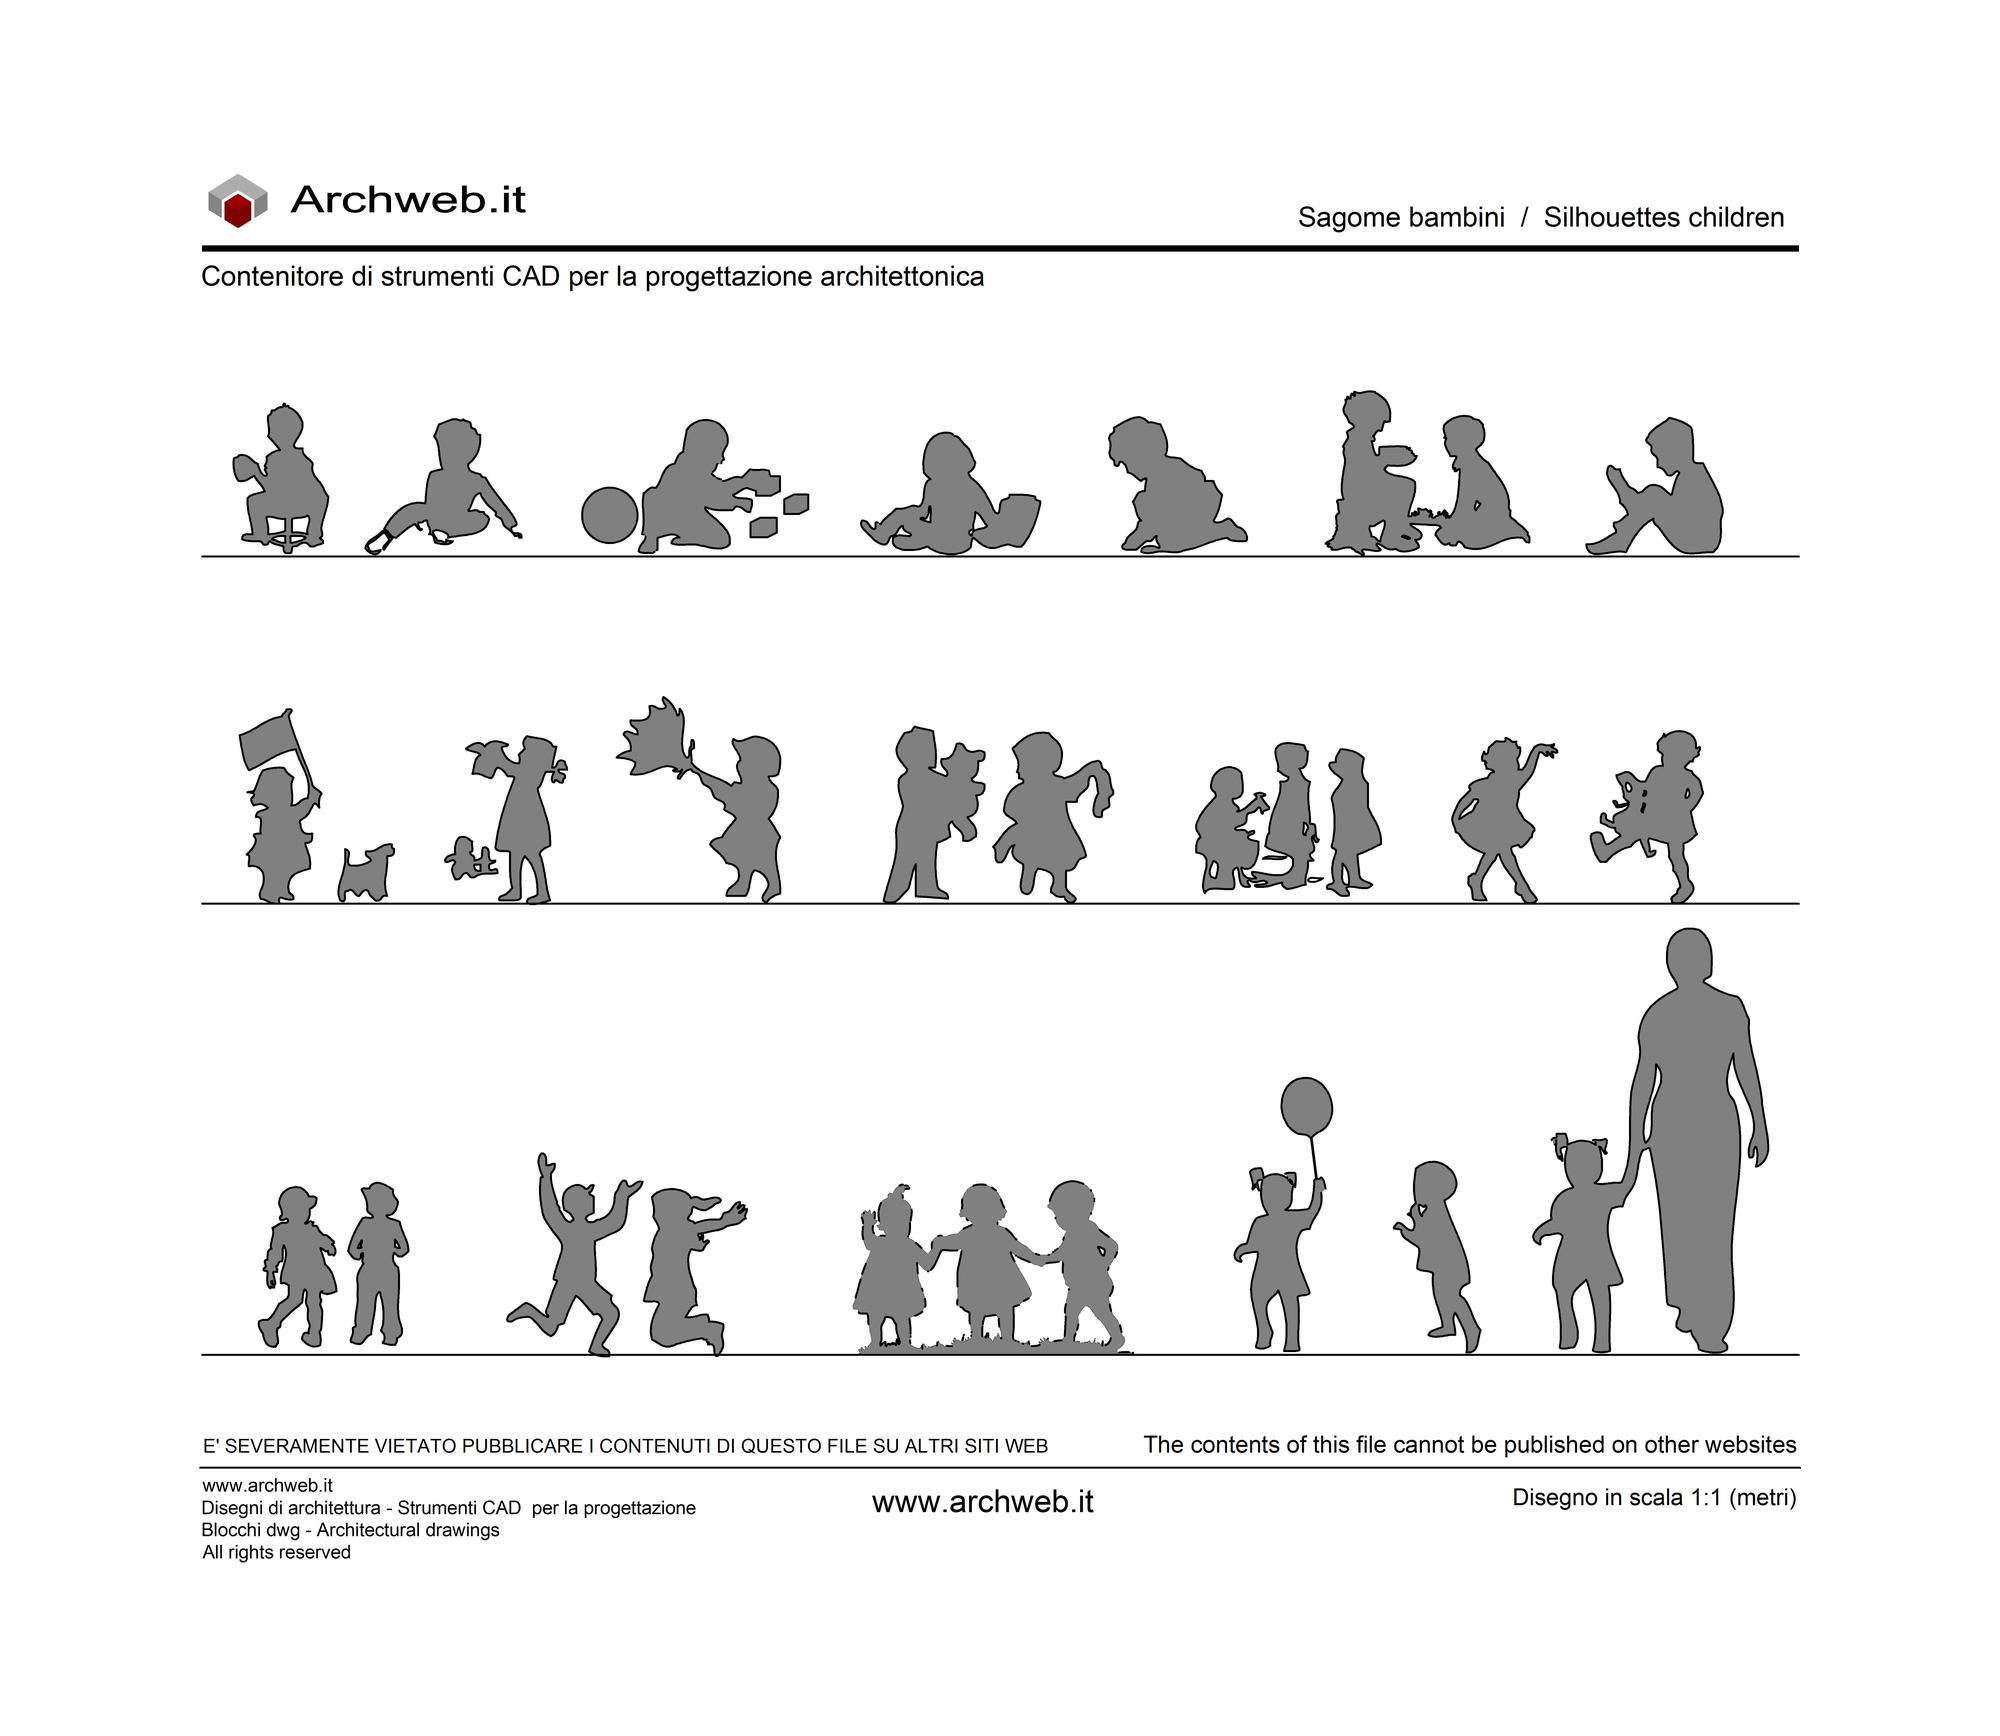 Drawing of children's silhouettes